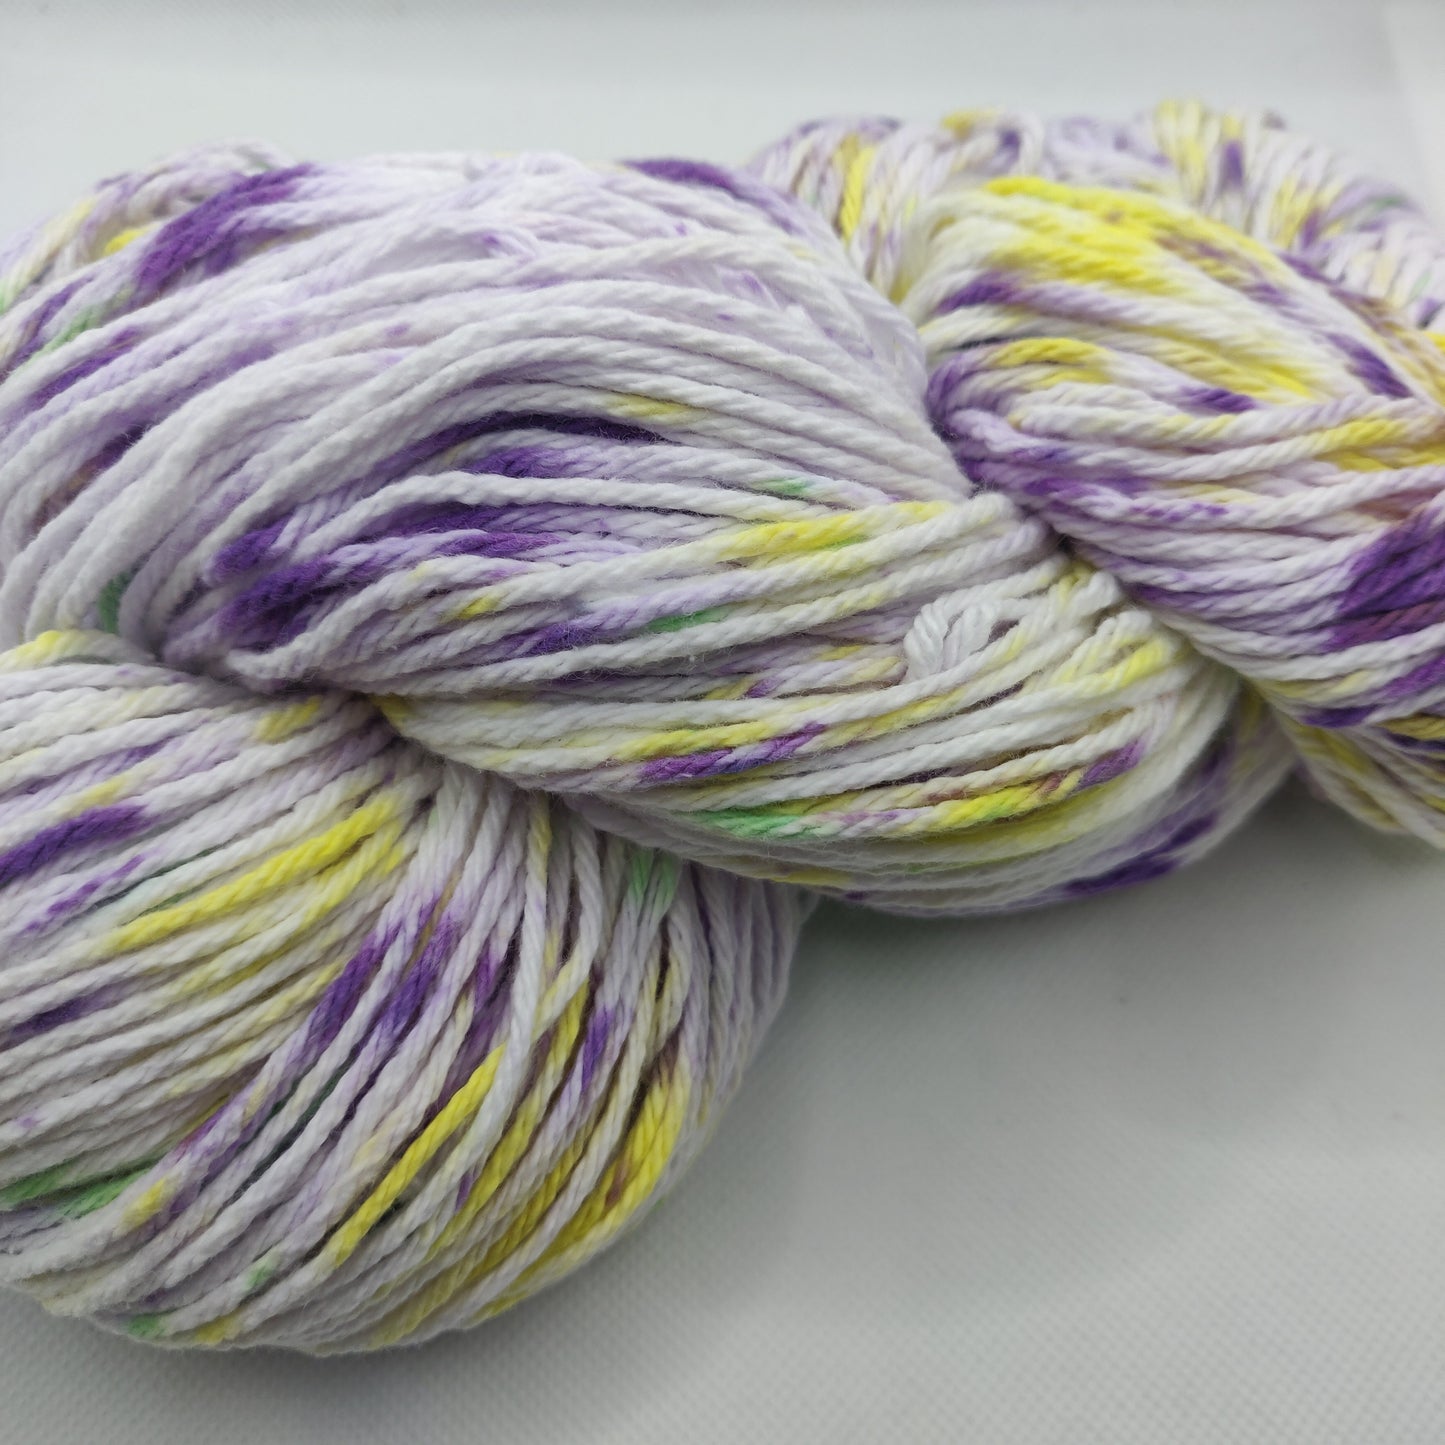 Garden Pansy - Hand Dyed Cotton Yarn